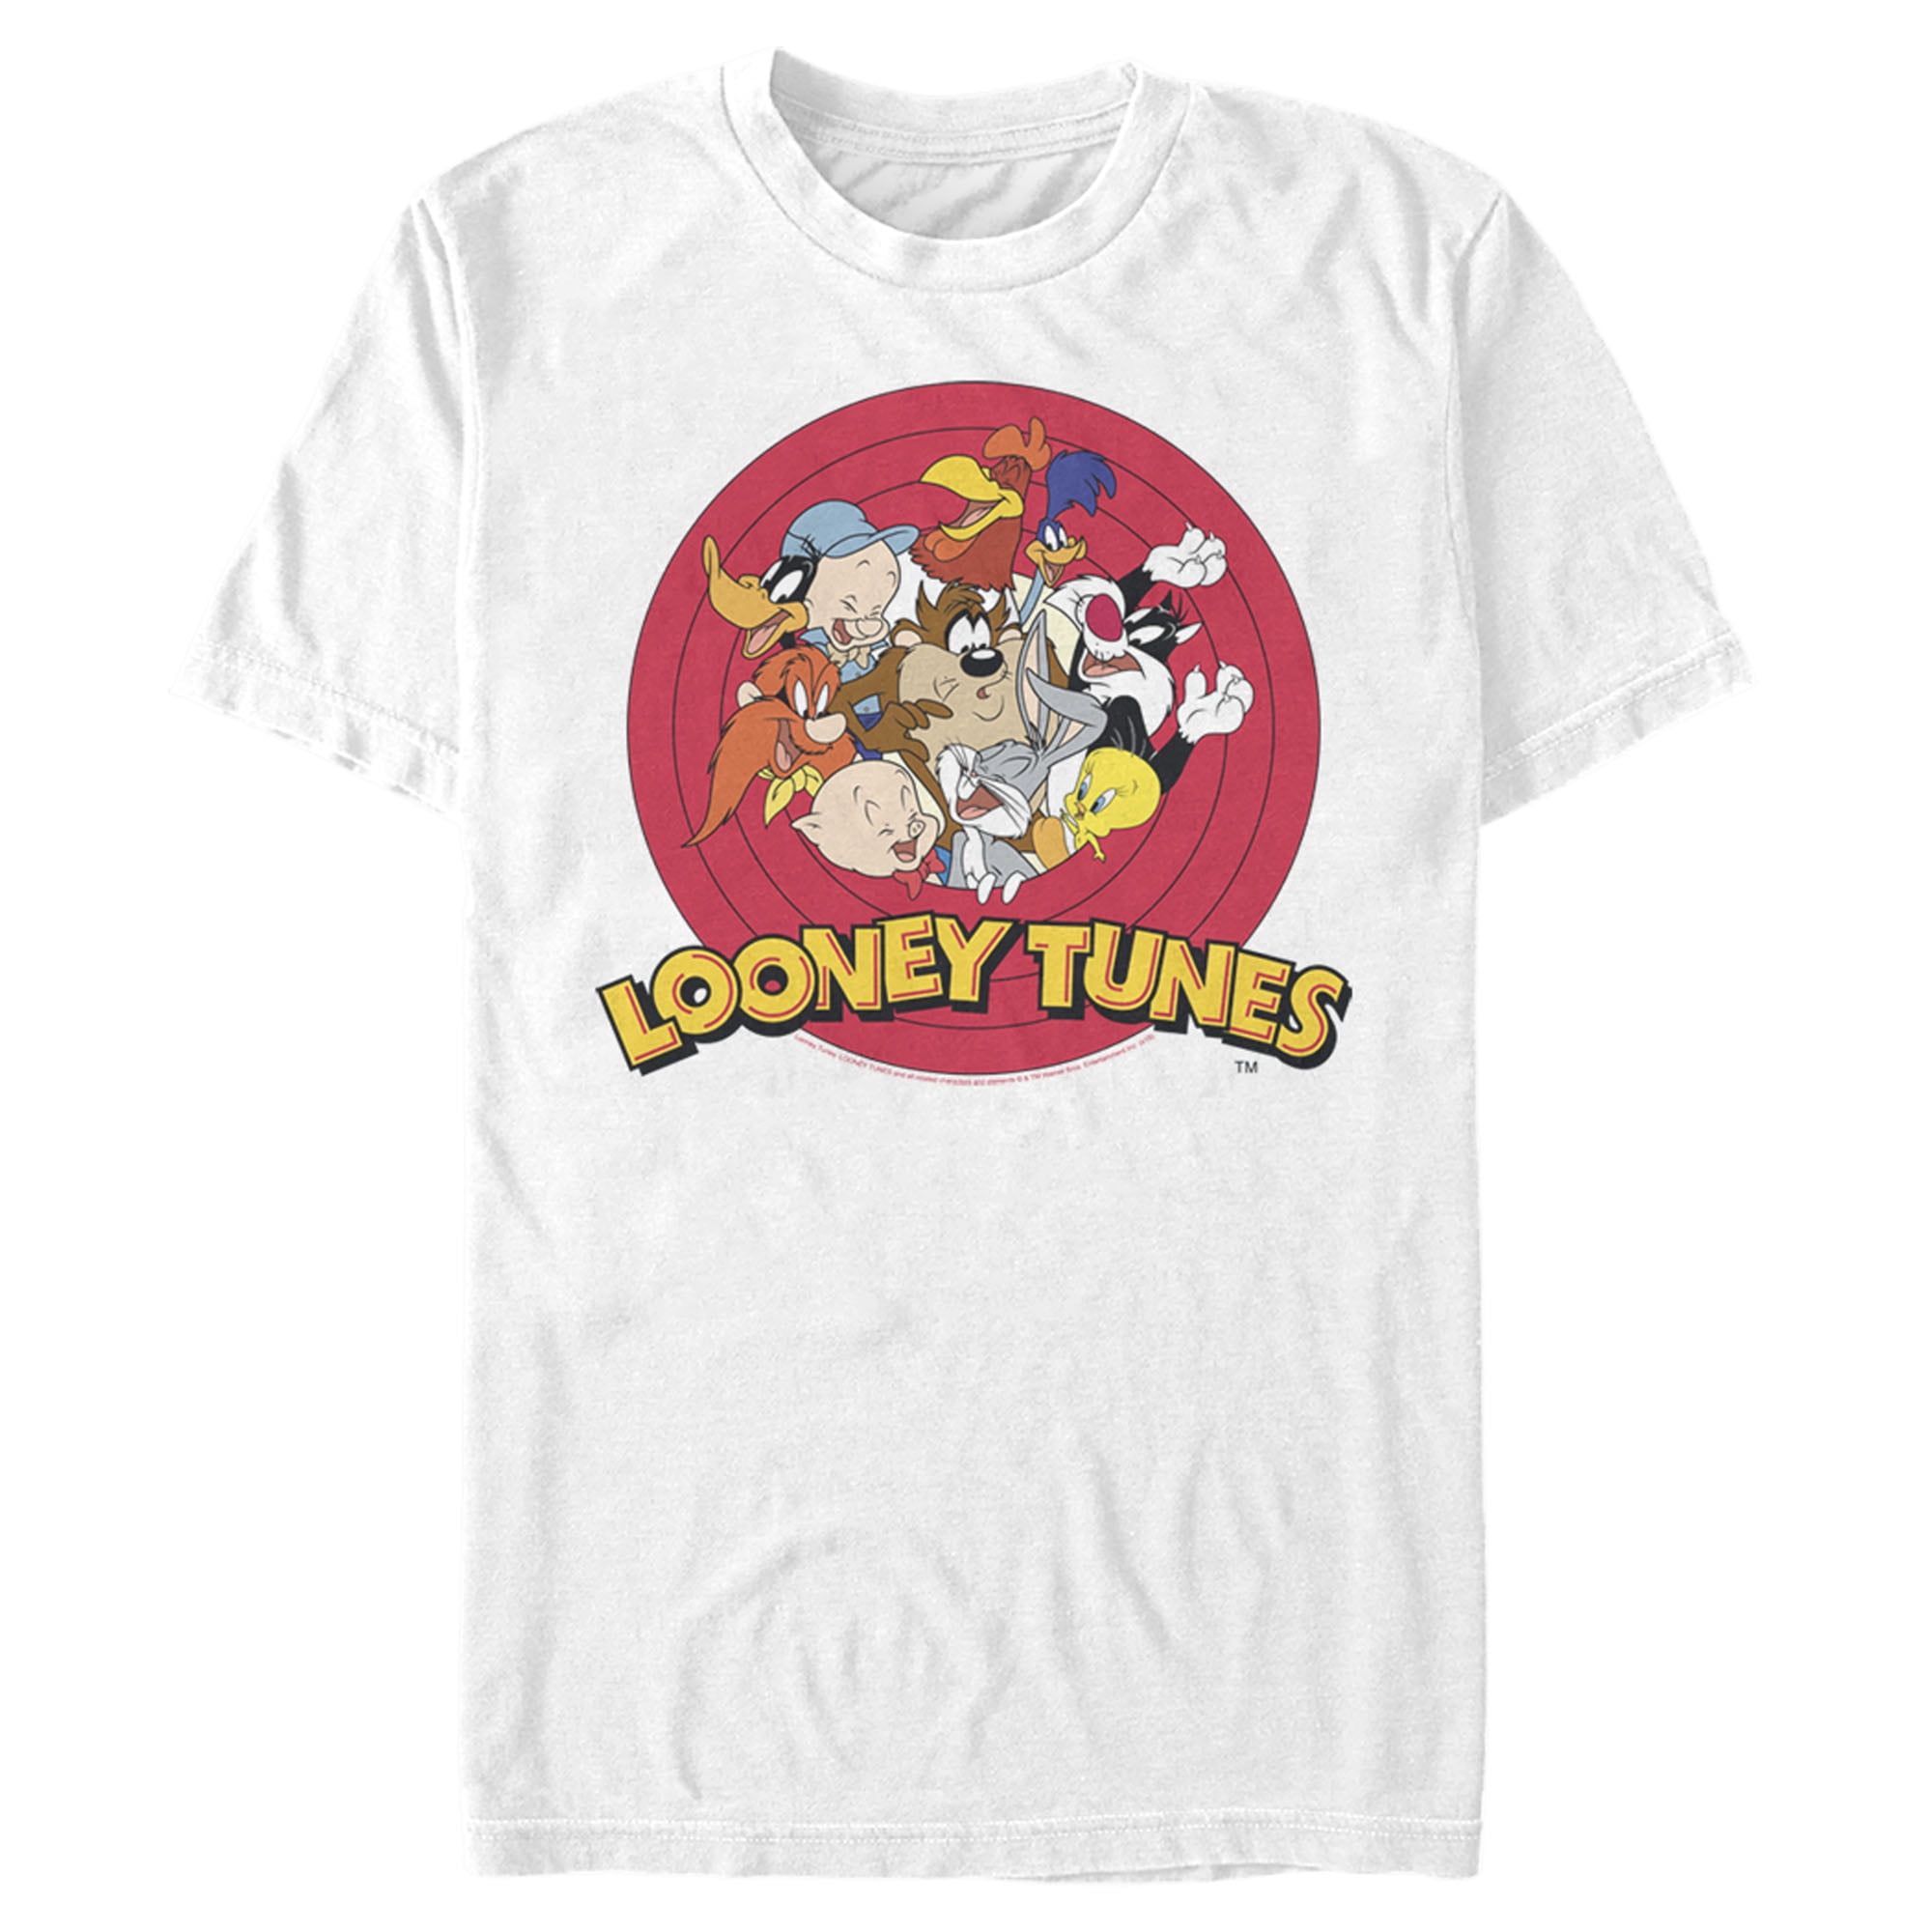 Men's Looney Tunes Character Classic Circle Graphic Tee White X Large